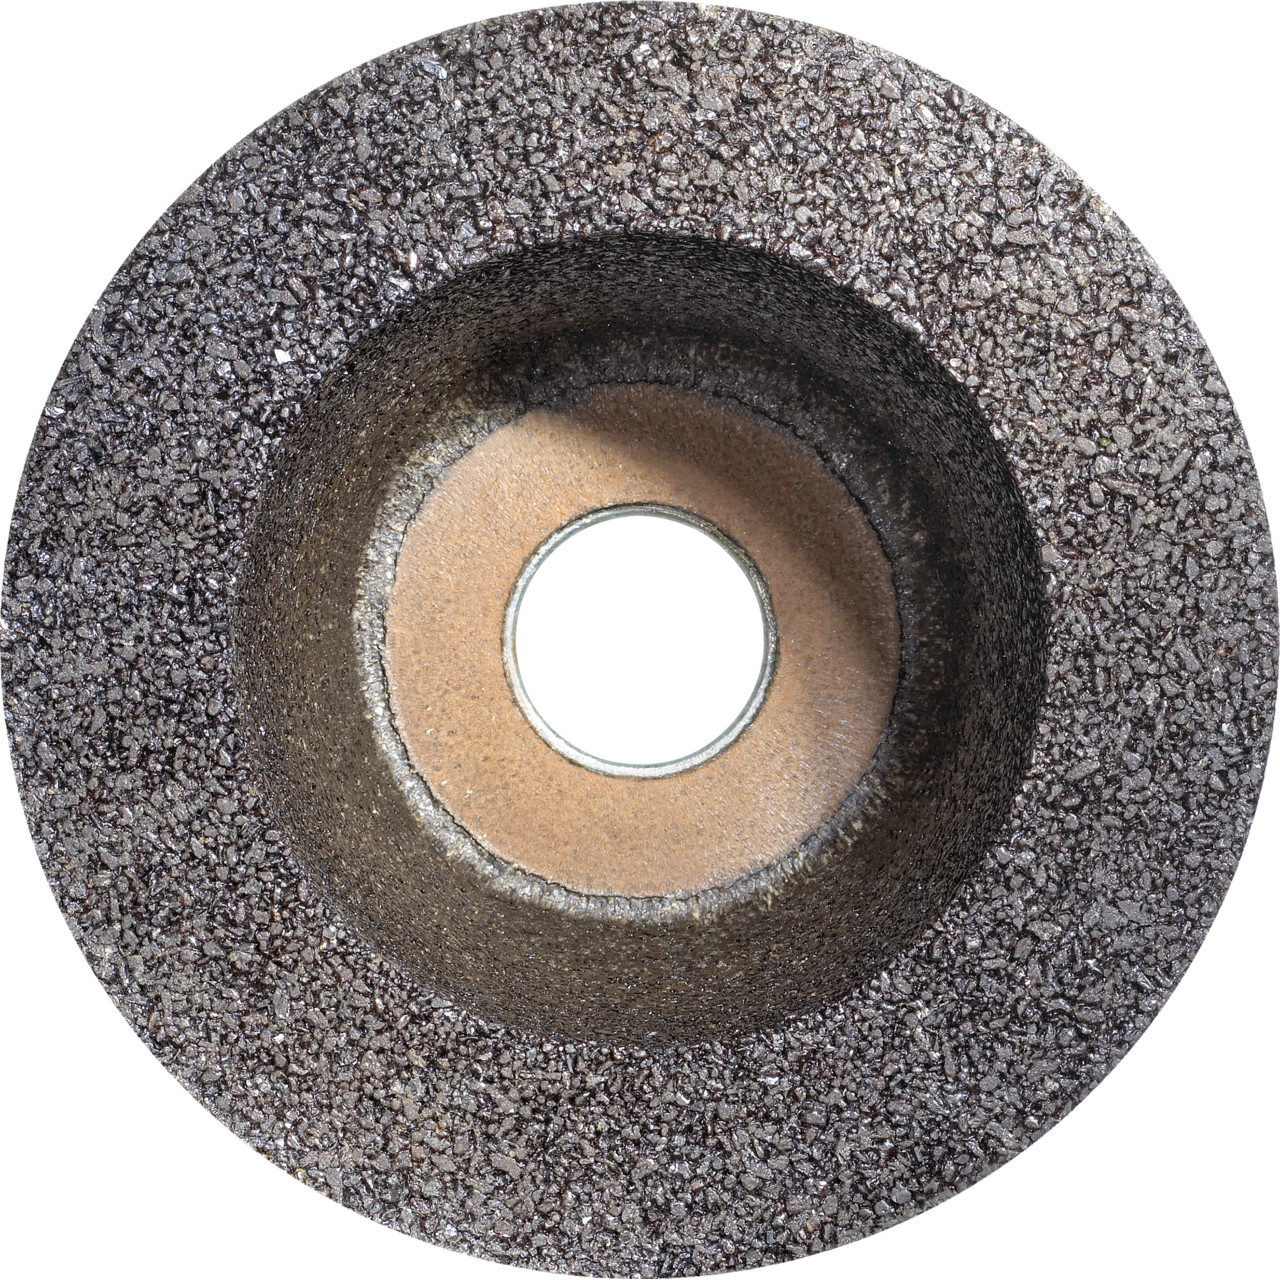 Tyrolit Resin cup DxTxGE 100x45xM14 For stone, shape: 6ZB cup wheel, Art. 83585